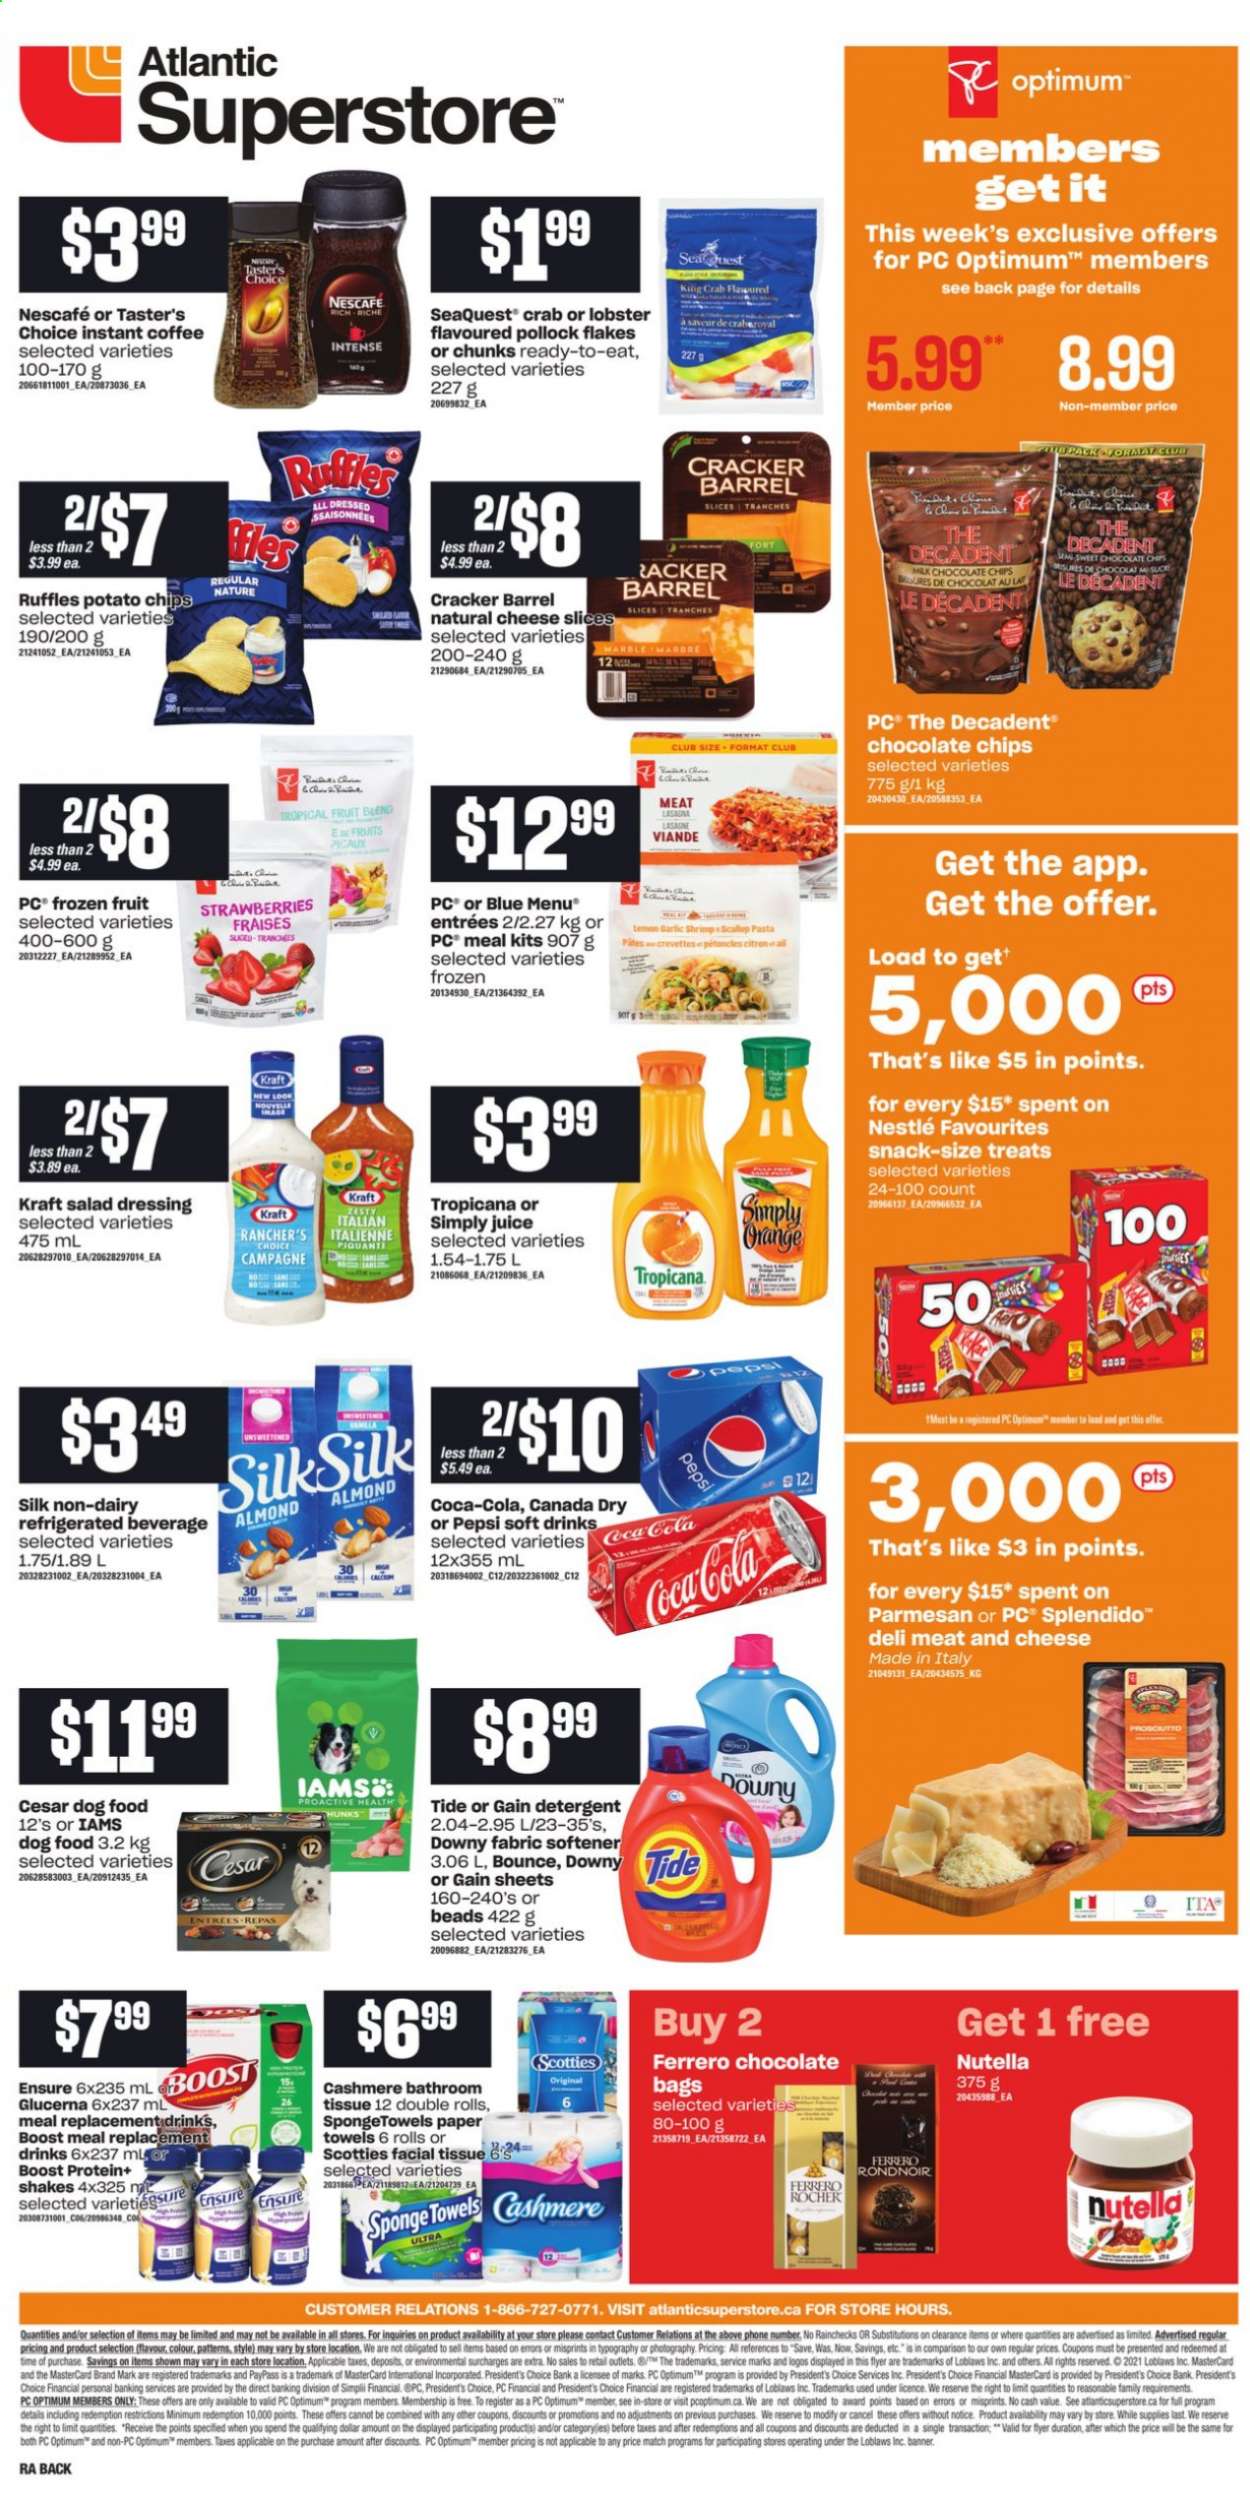 thumbnail - Atlantic Superstore Flyer - August 12, 2021 - August 18, 2021 - Sales products - garlic, strawberries, lobster, scallops, pollock, crab, pasta, lasagna meal, Kraft®, sliced cheese, parmesan, Président, Silk, shake, snack, crackers, potato chips, Ruffles, salad dressing, dressing, Canada Dry, Coca-Cola, Pepsi, juice, soft drink, Boost, instant coffee, bath tissue, kitchen towels, paper towels, Gain, Tide, fabric softener, Bounce, Downy Laundry, animal food, dog food, Optimum, Iams, Glucerna, Nestlé, Nutella, Nescafé. Page 2.